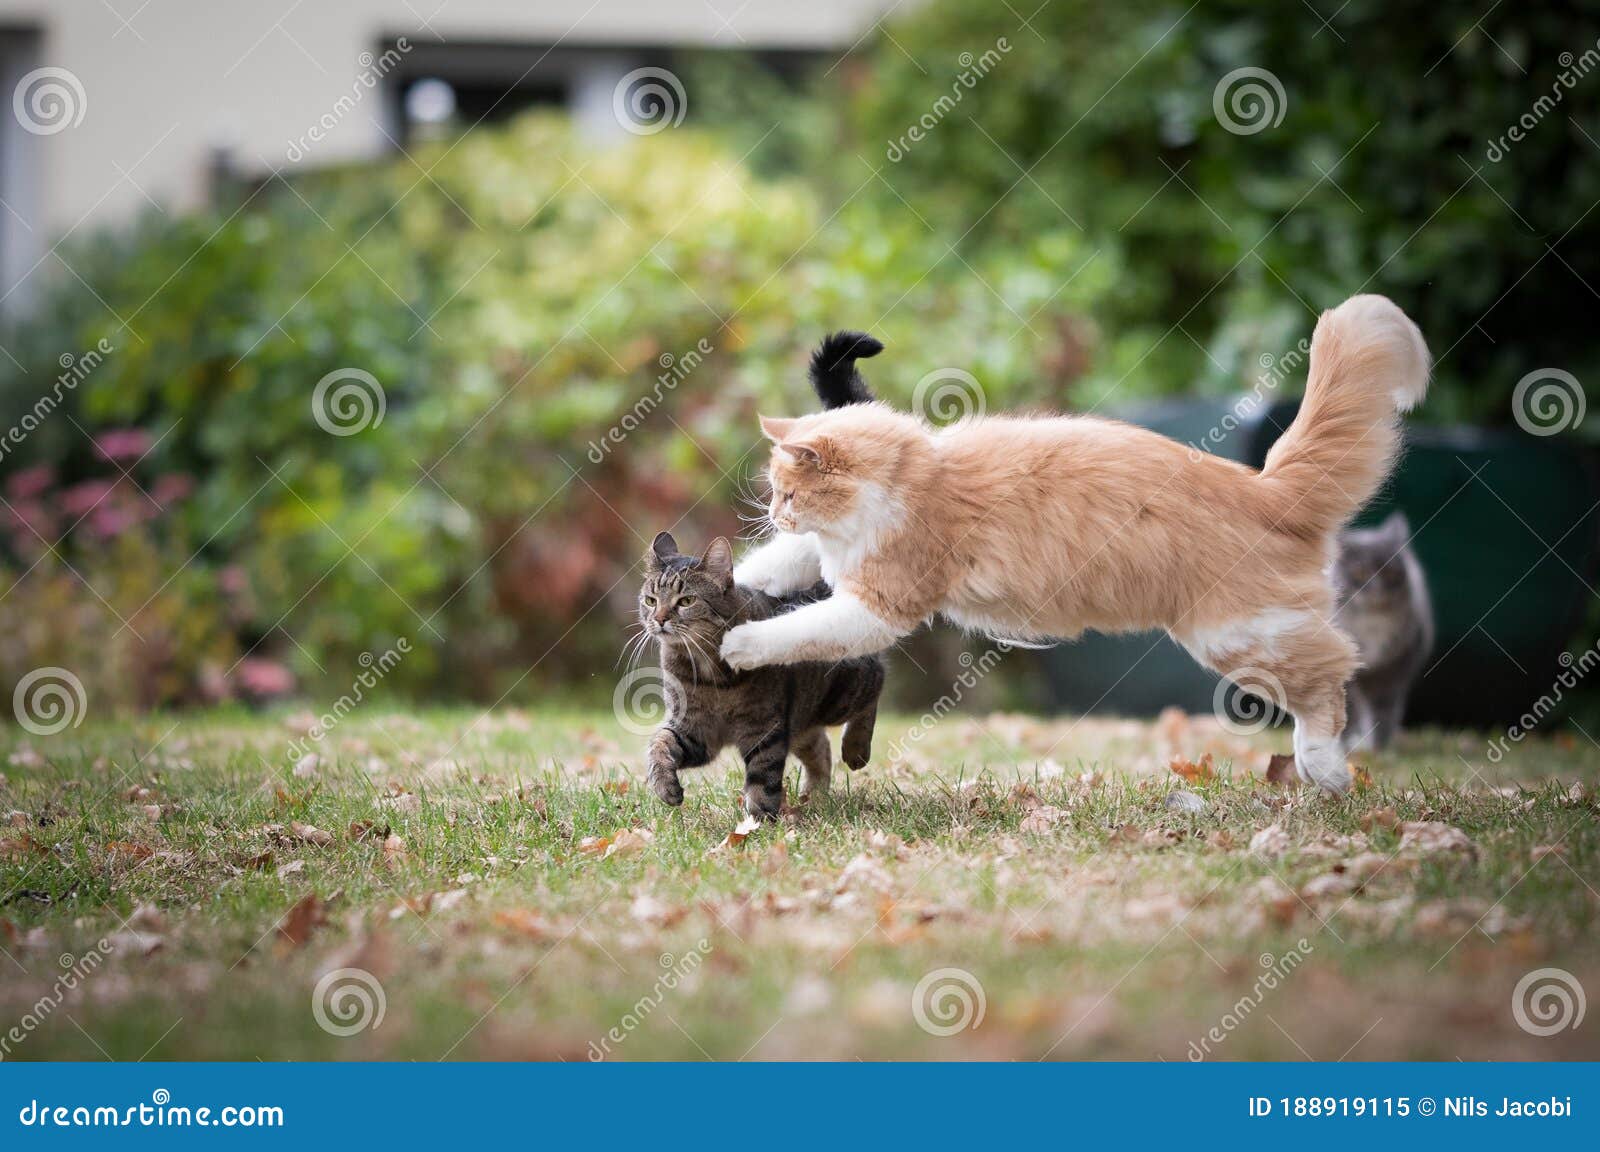 Cat fights - a first aid tip - The Mewes Vets